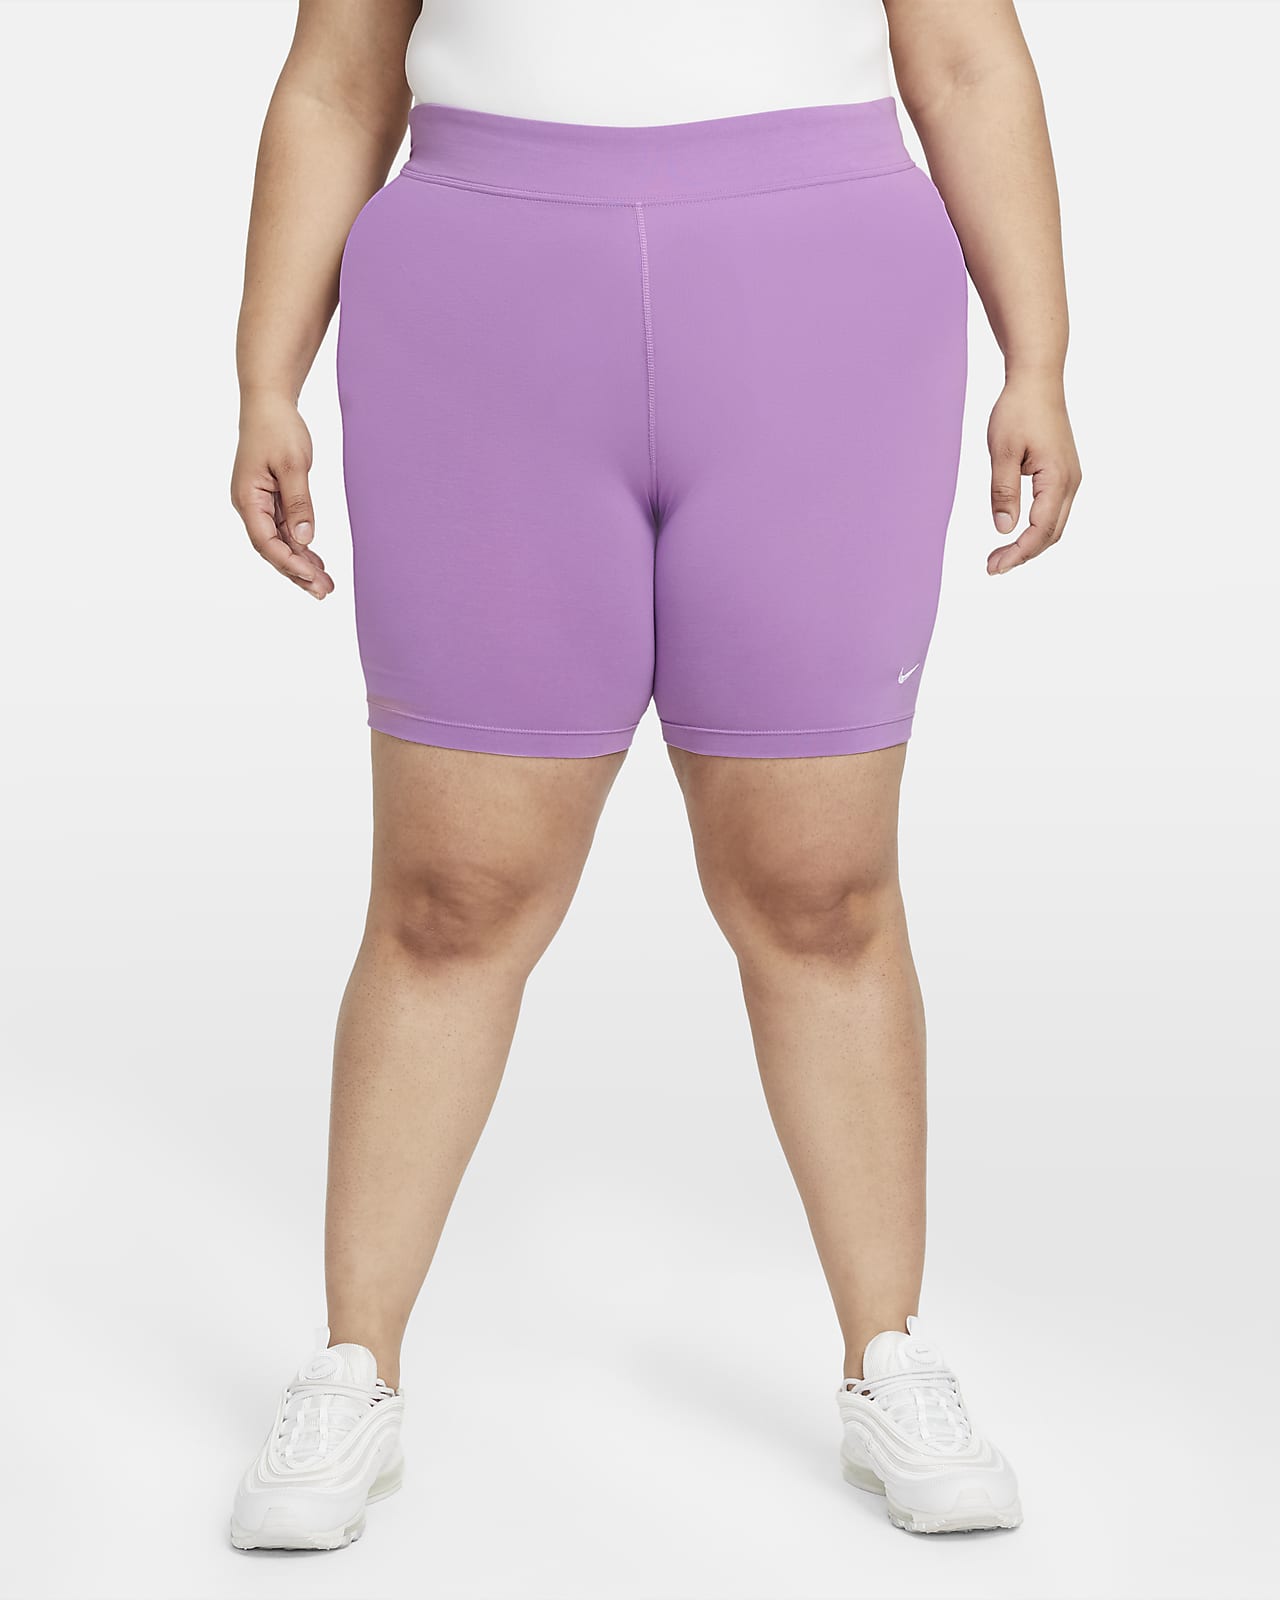 best bike shorts for plus size